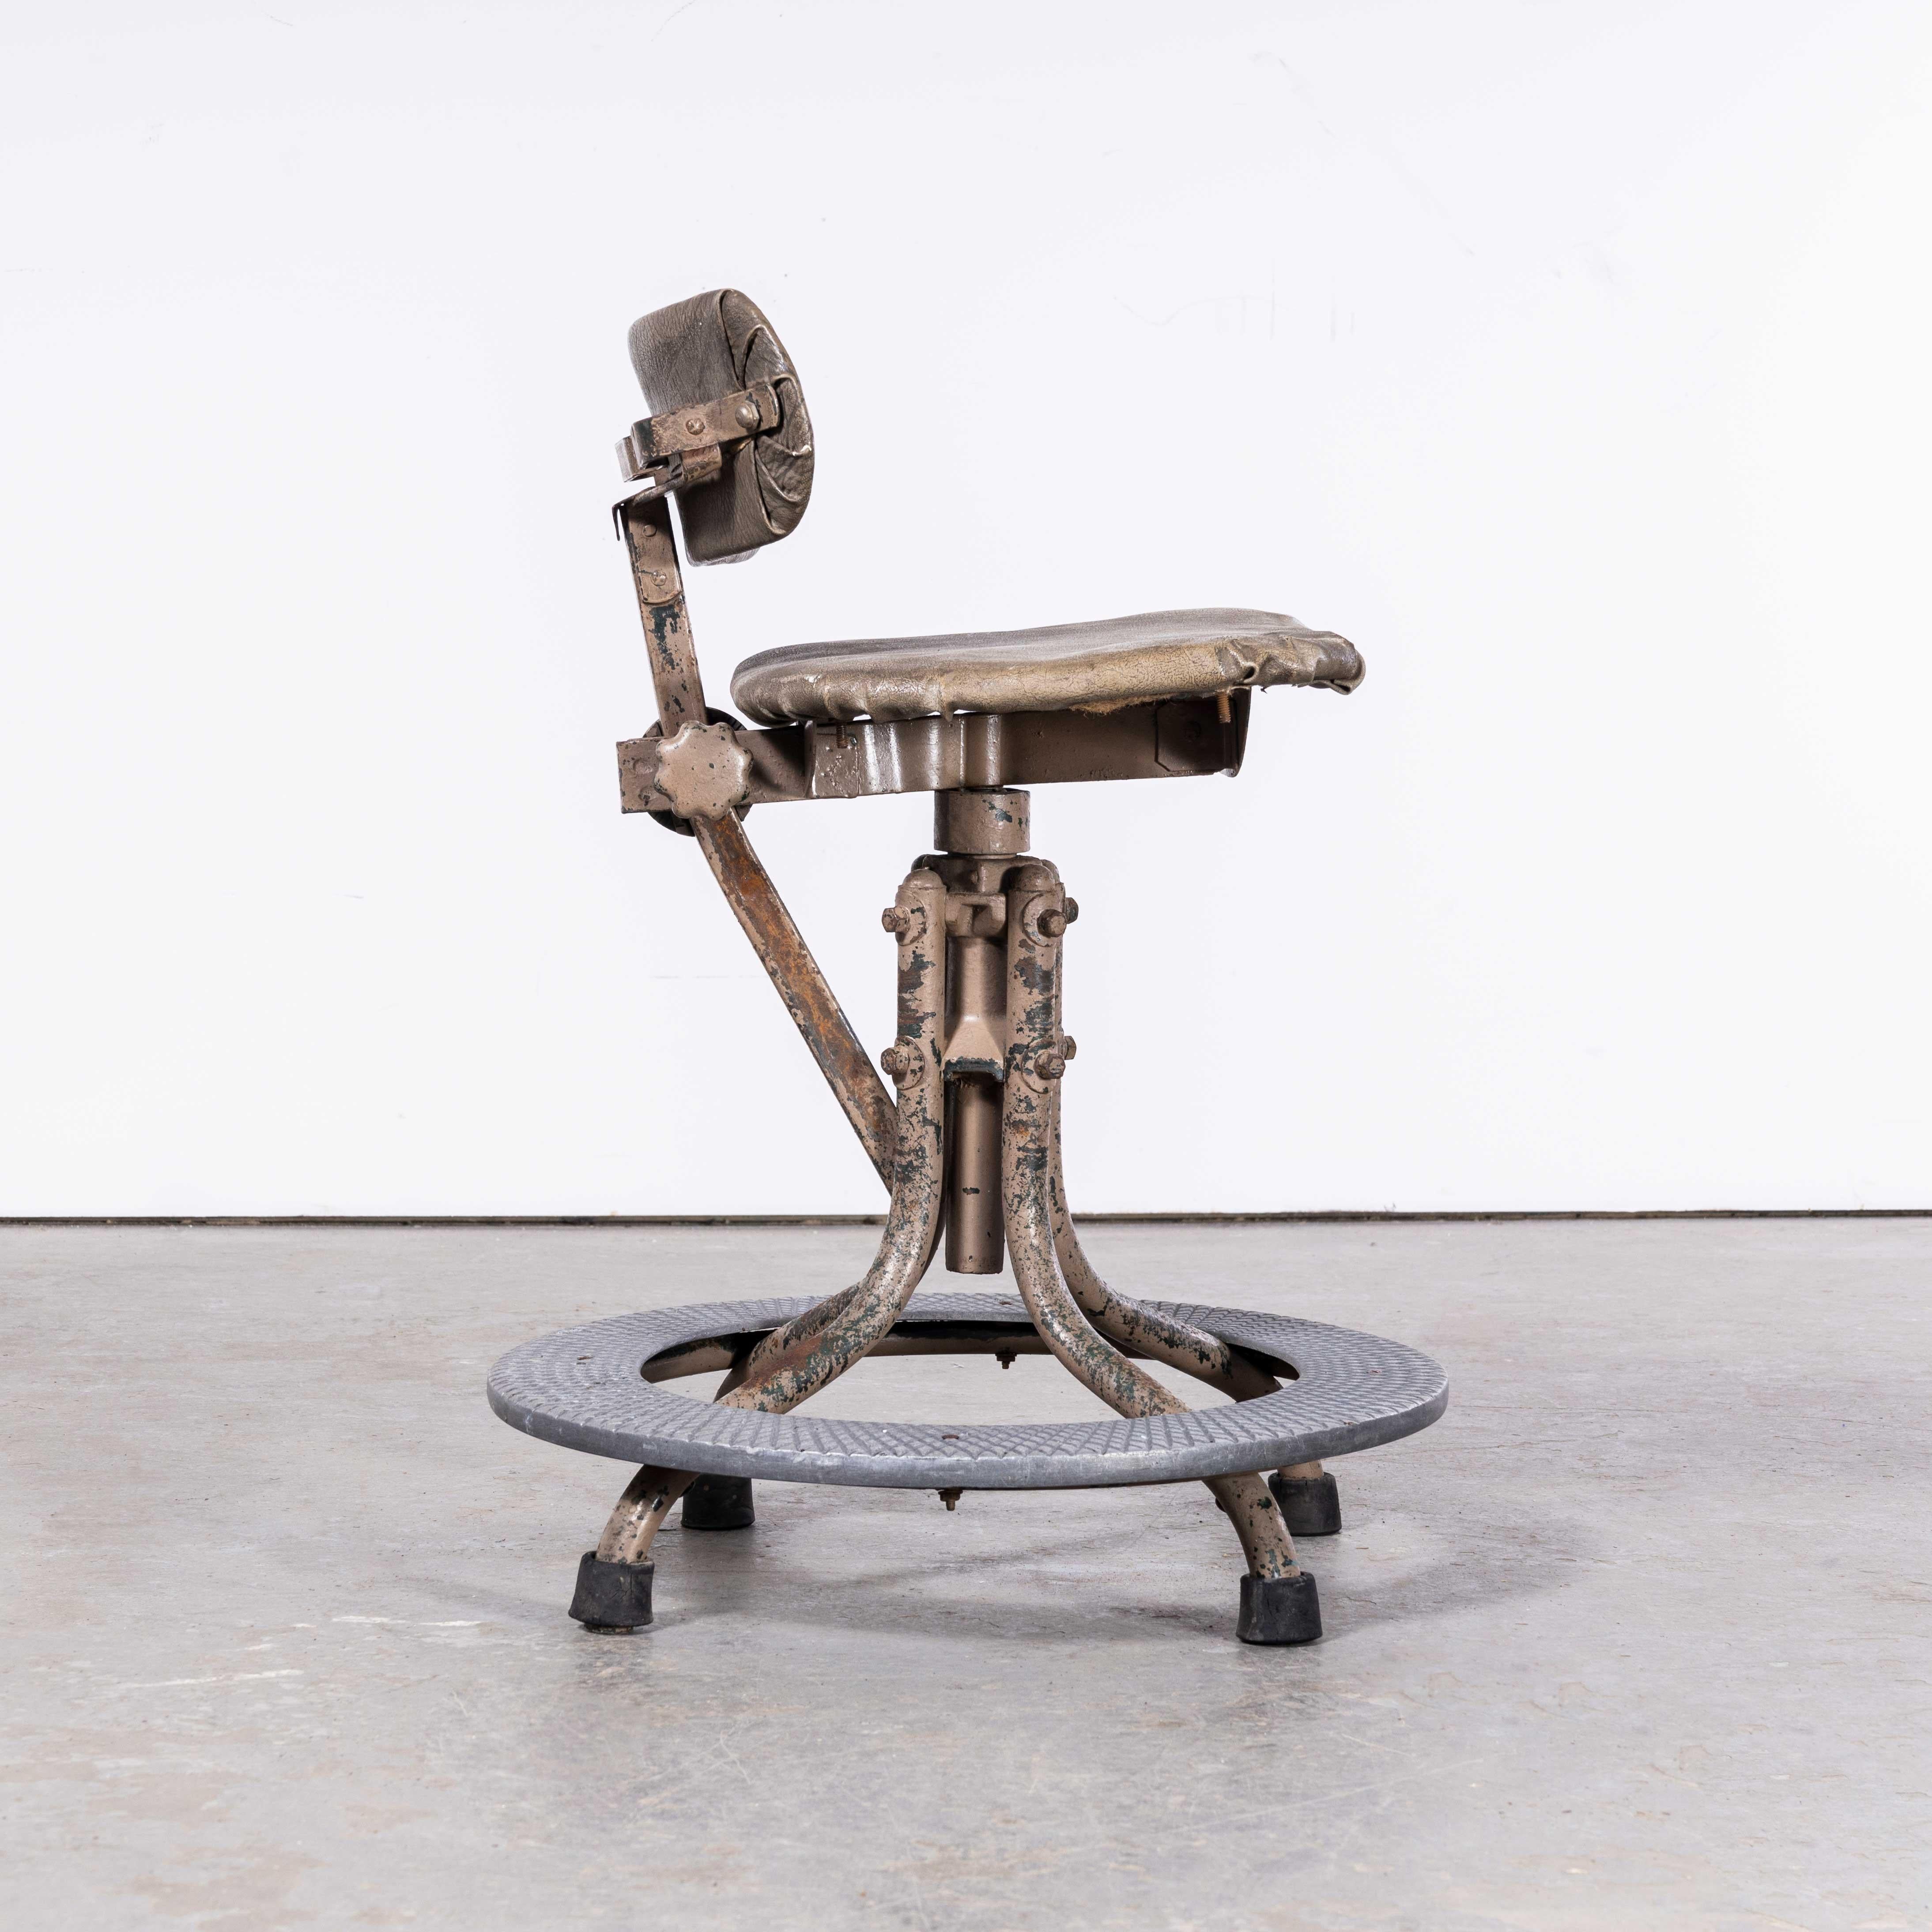 1950s Evertaut Original Machinists Chair – With Foot Support (2518)
1950s Evertaut Original Machinists Chair – With Foot Support. In it’s heyday Evertaut was the British competitor to Tolix, Multipl’s and Fibrocit. This chair is one of their iconic